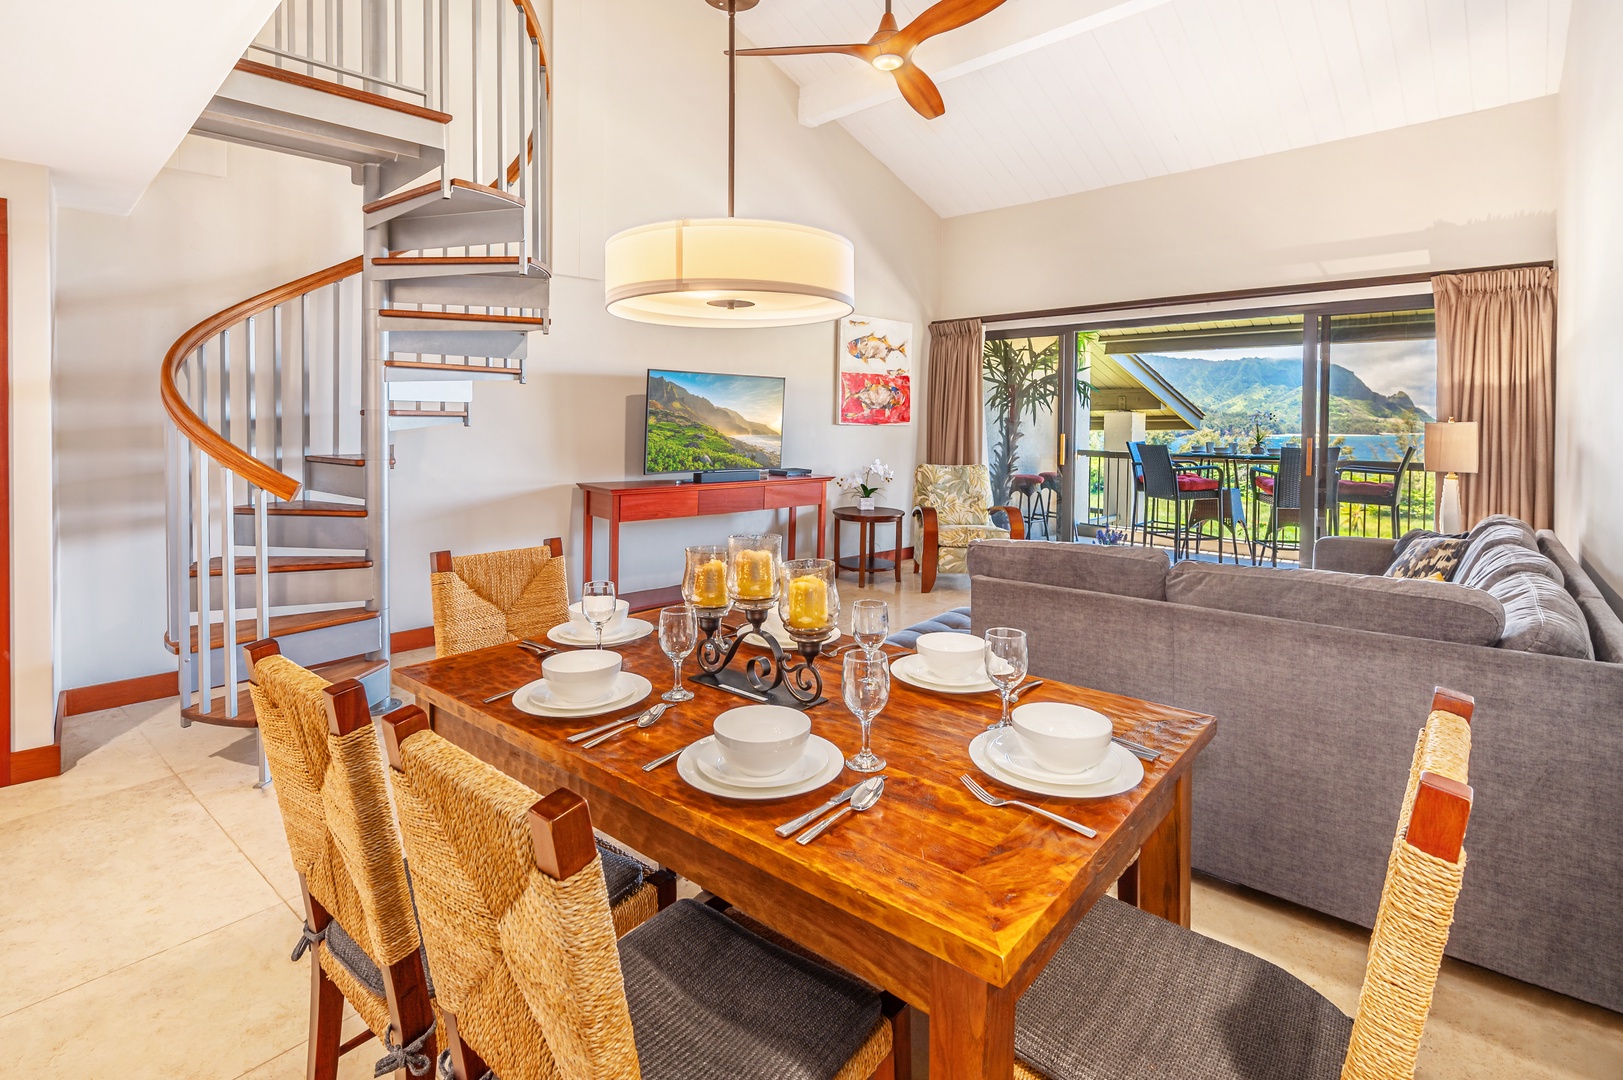 Princeville Vacation Rentals, Hanalei Bay Resort 7307/08 - Dining for six people